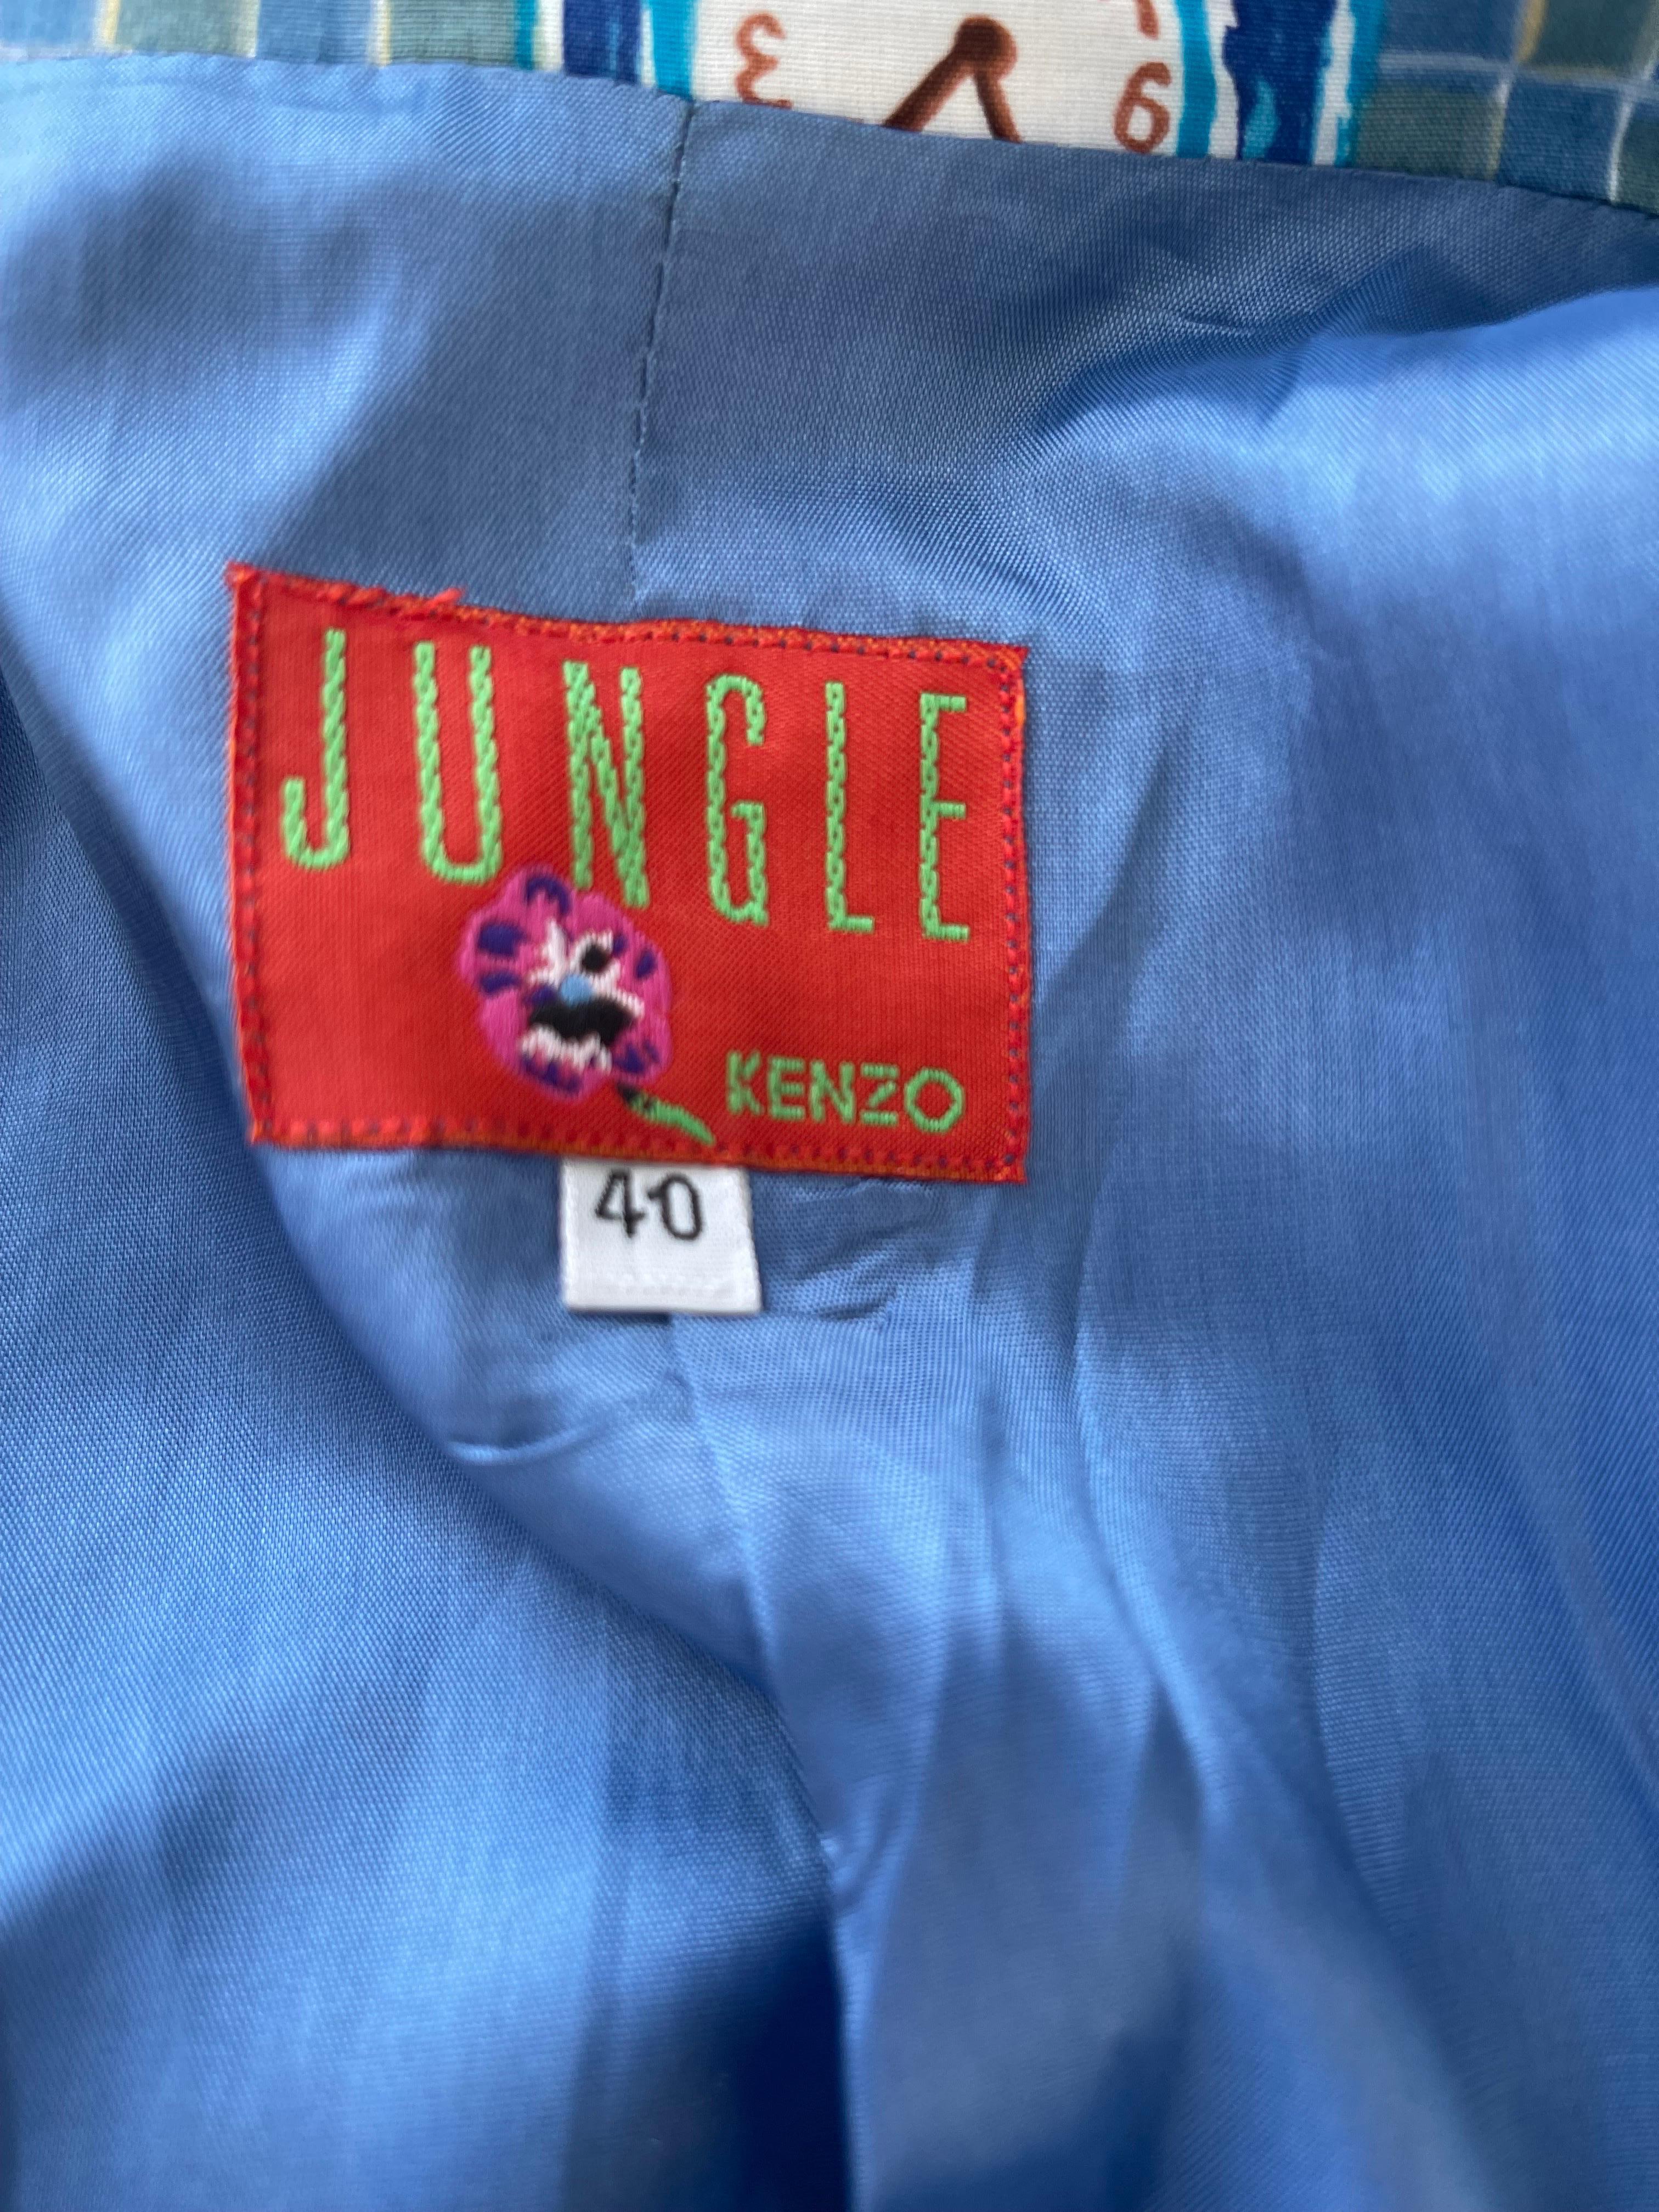 Rare early 90s KENZO JUNGLE bright blue multi colored novelty print blazer jacket ! Sot rayon fabric in bright colors of blue, terracotta, yellow, turquoise and brown throughout. Three buttons up the front, and two pockets at each side of the waist.